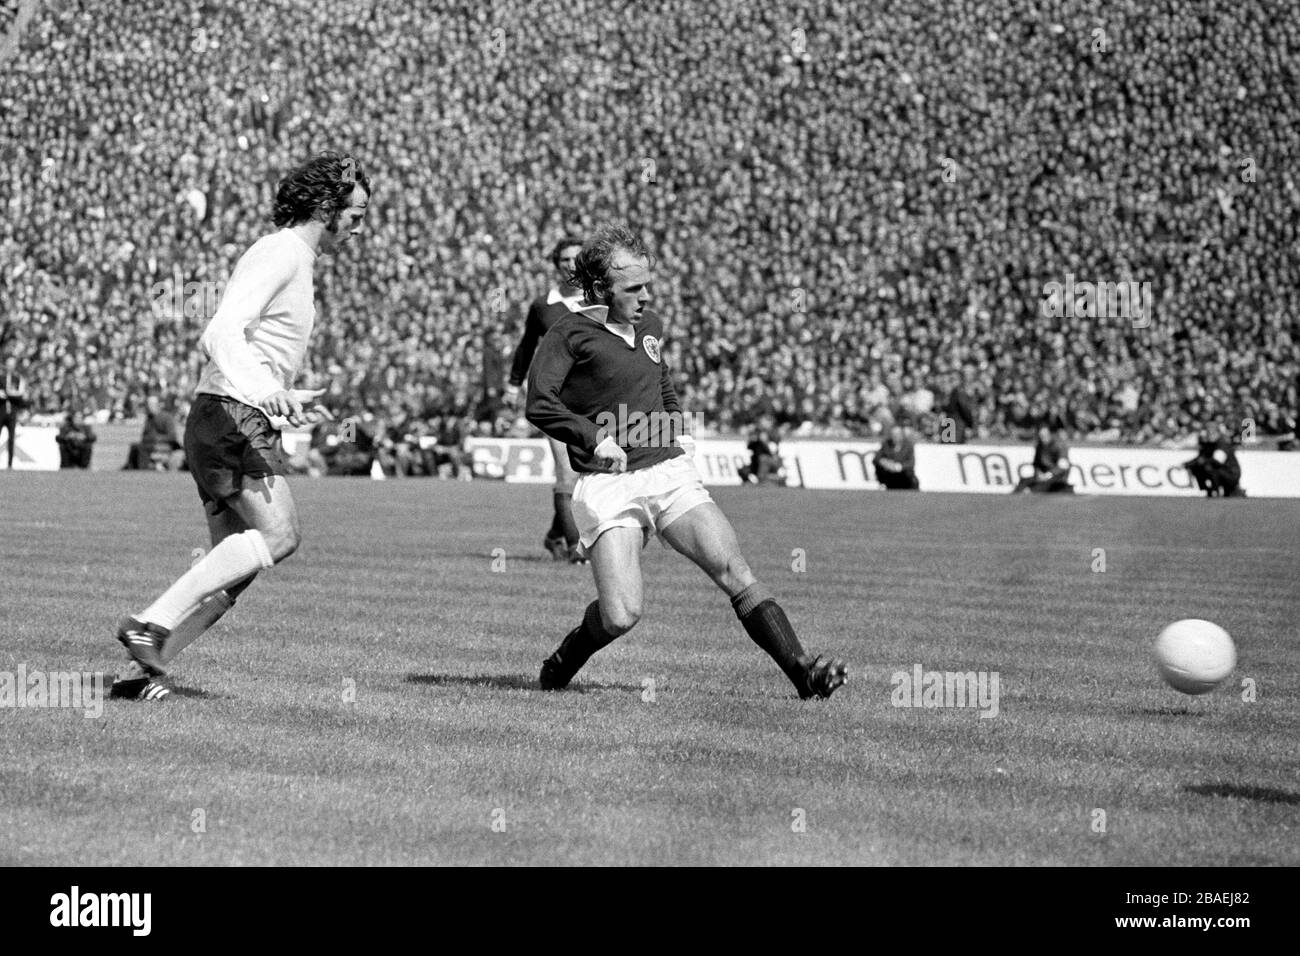 Scotland's Archie Gemmill (r) lays the ball off, watched by England's Peter Storey (l) Stock Photo